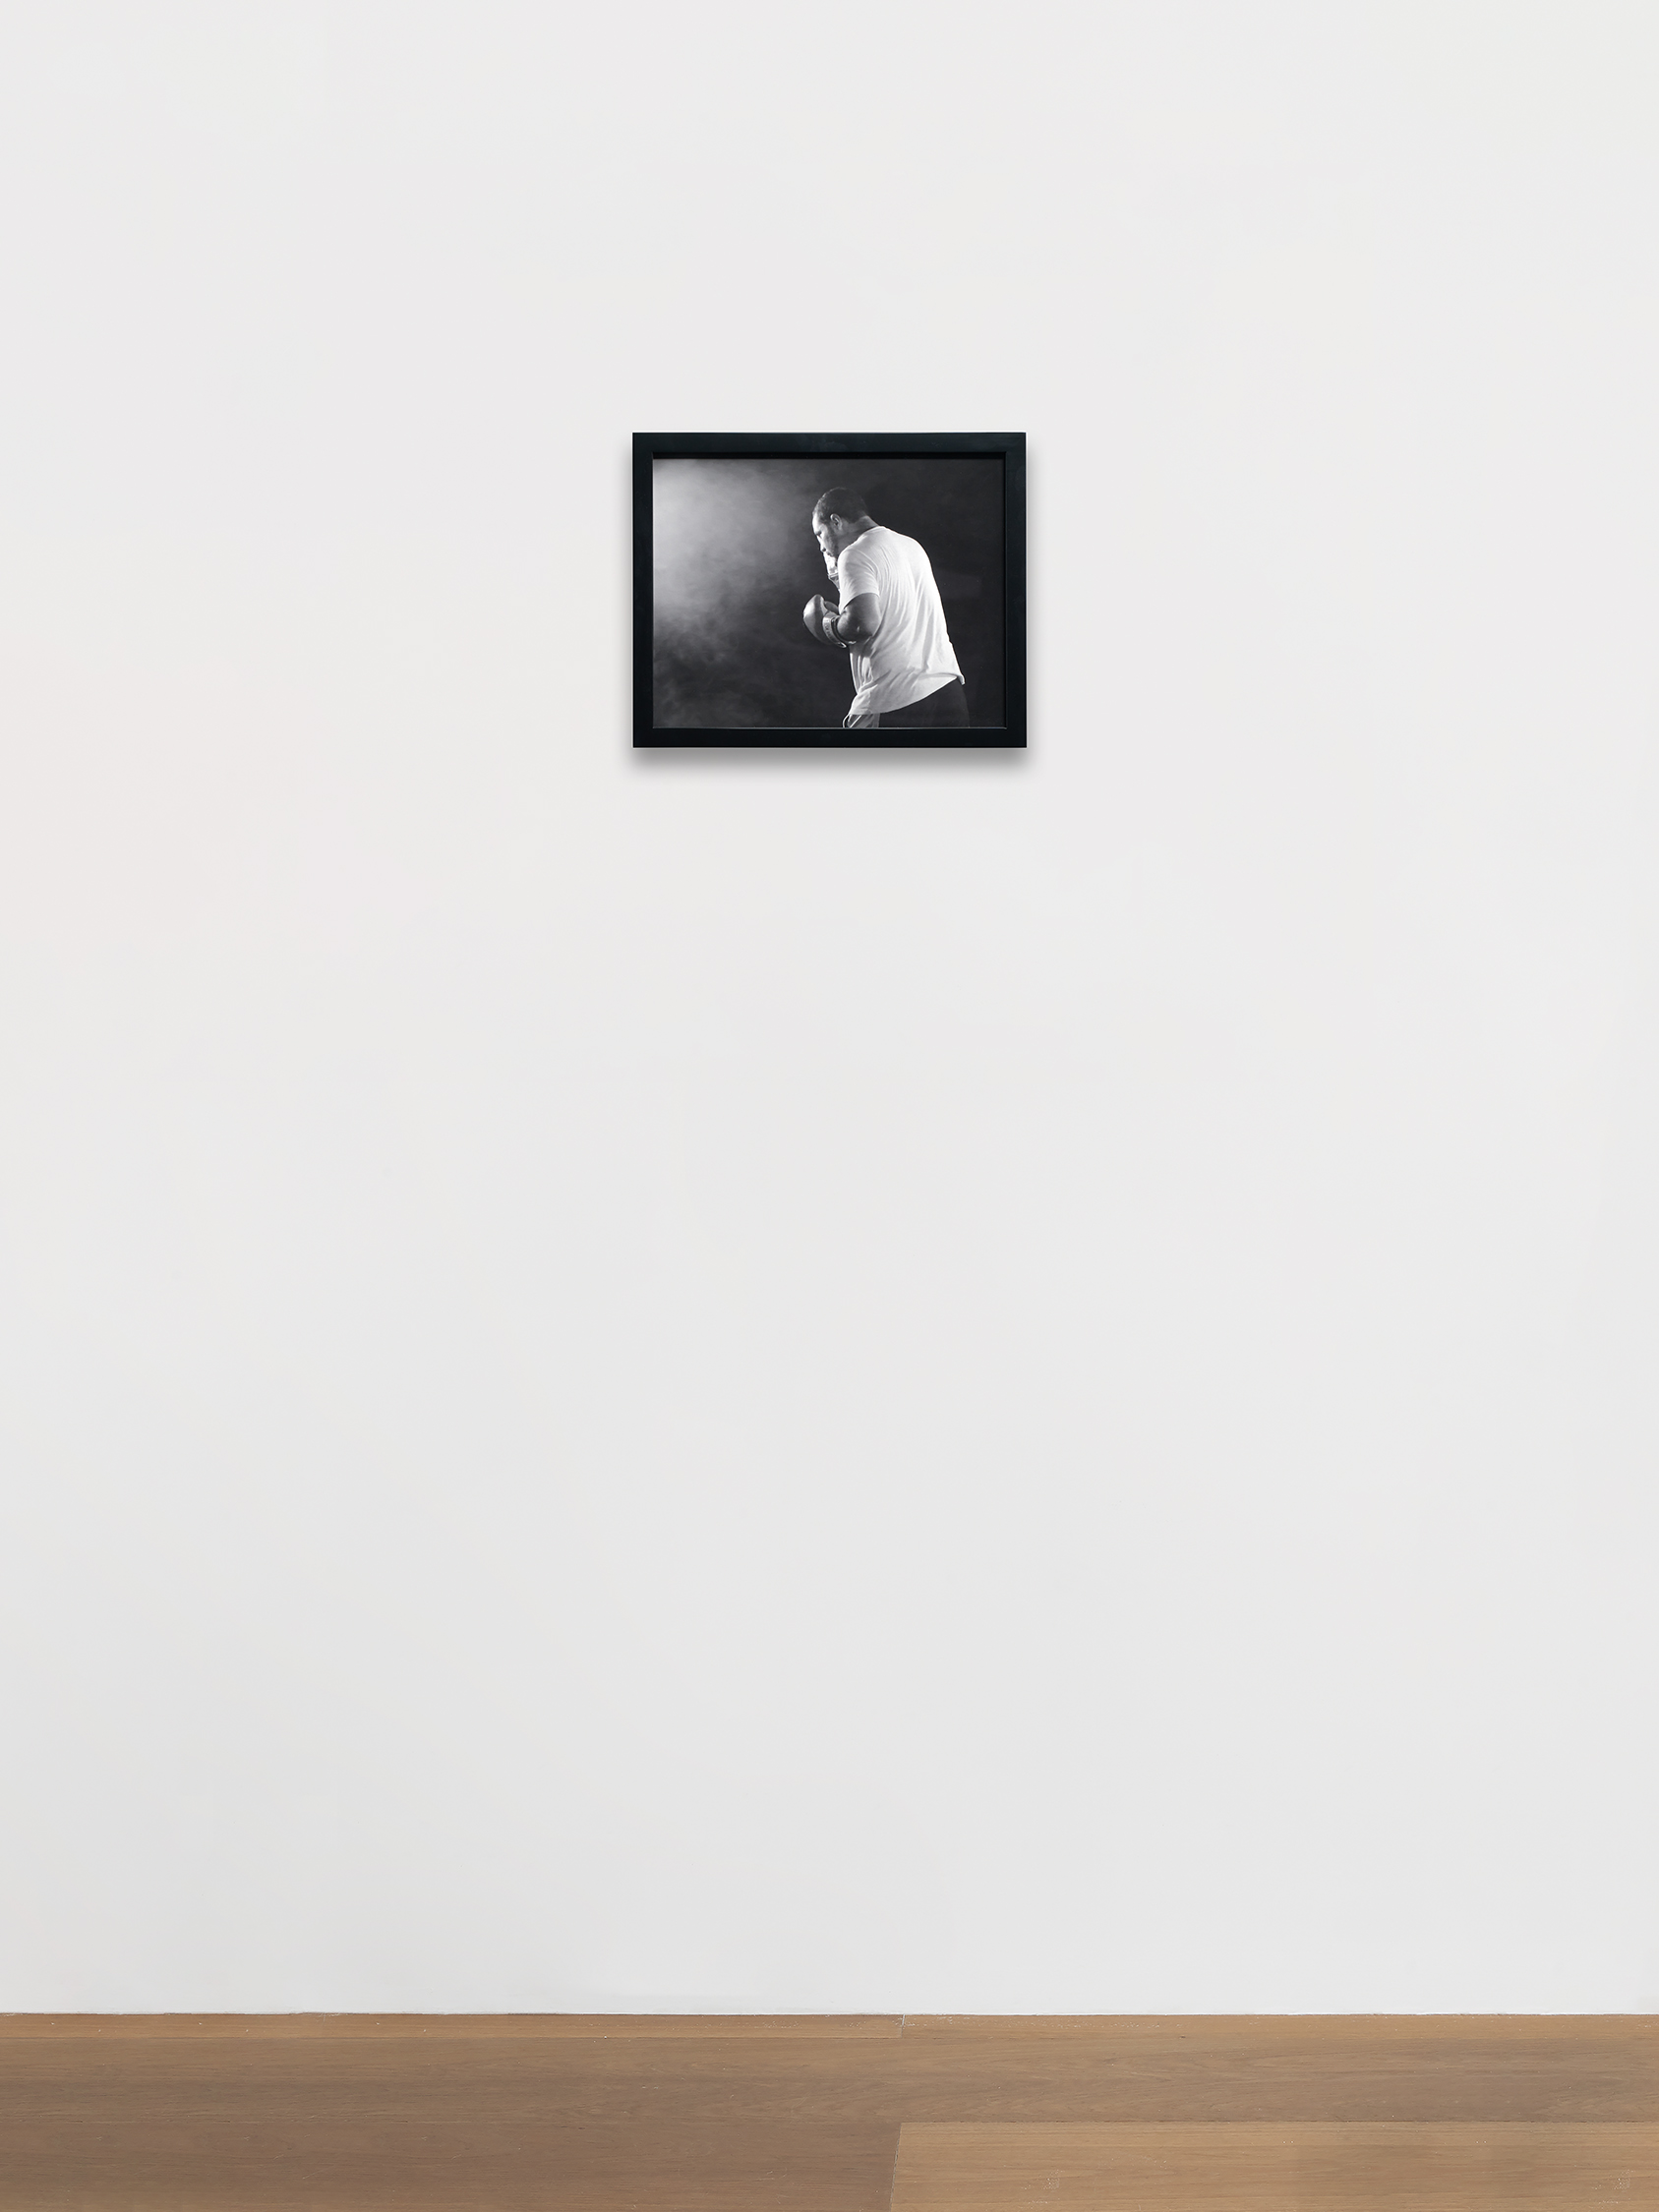 Image of Carrie Mae Weems' work The Boxer, 2012